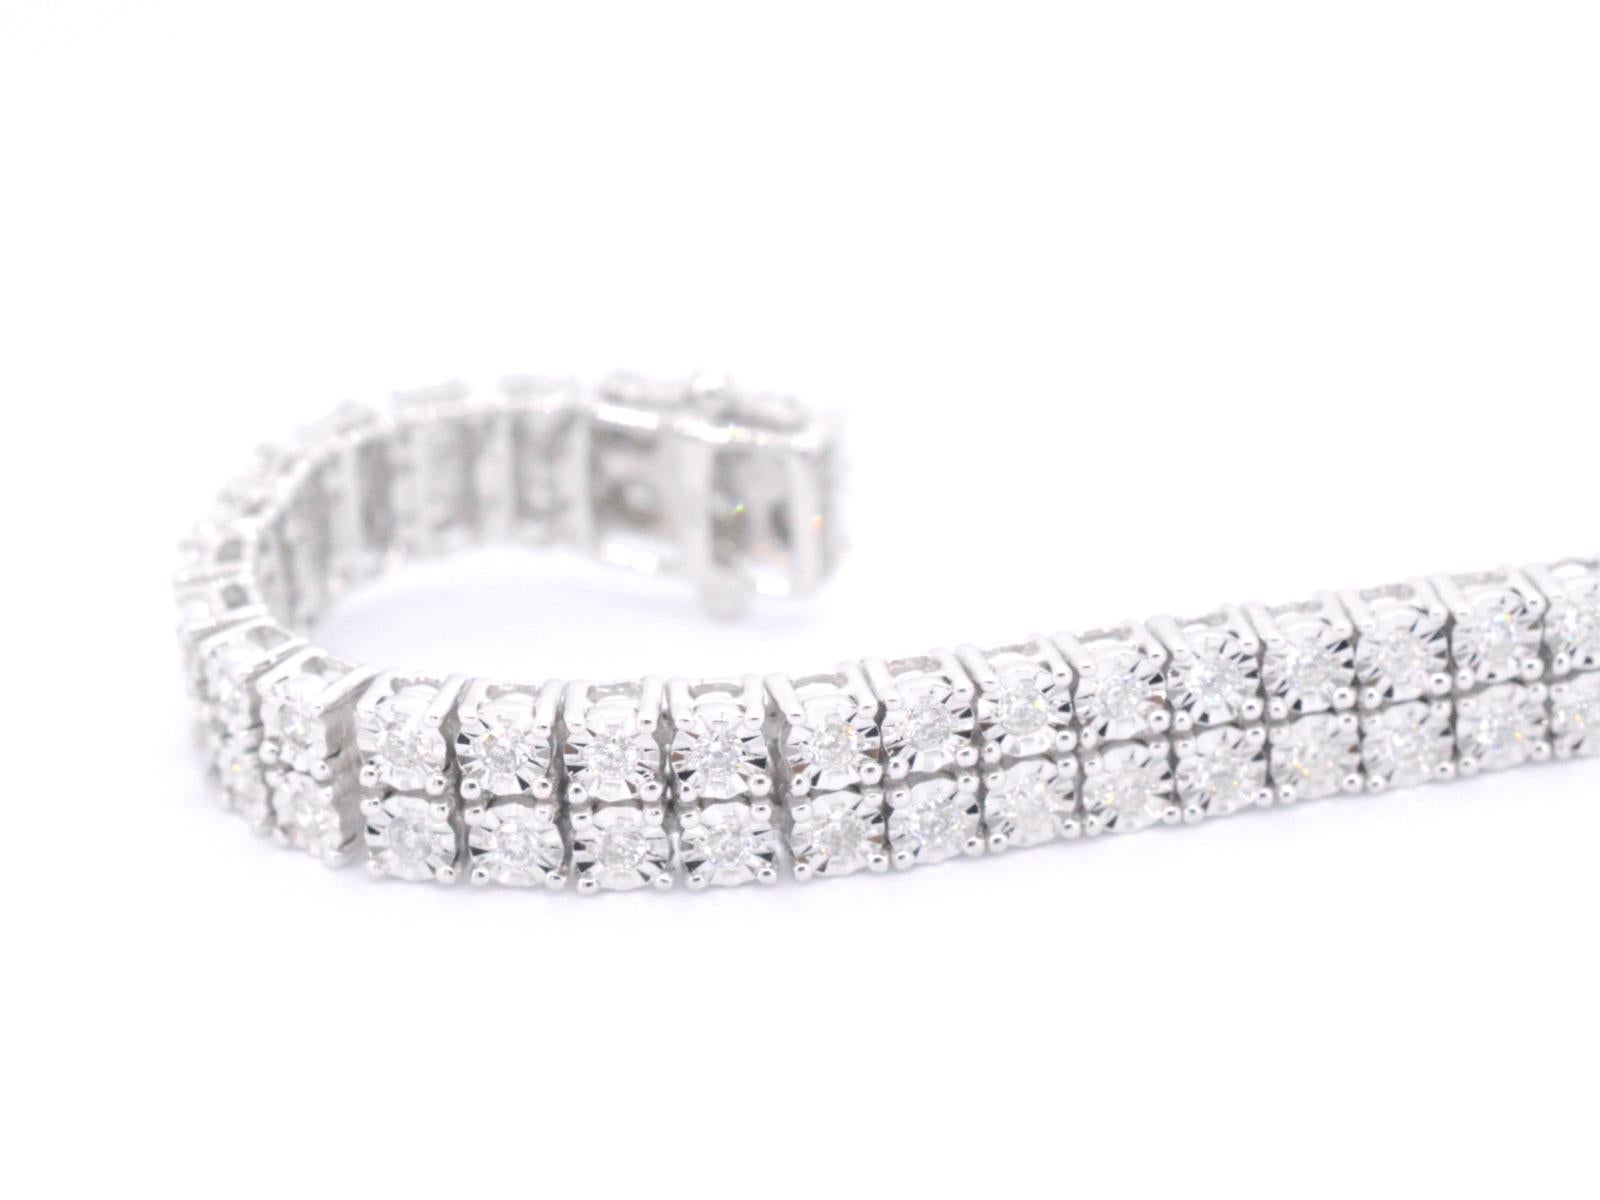 Women's White Gold Tennis Bracelet with 2 Rows of Diamonds 1.50 Carat For Sale